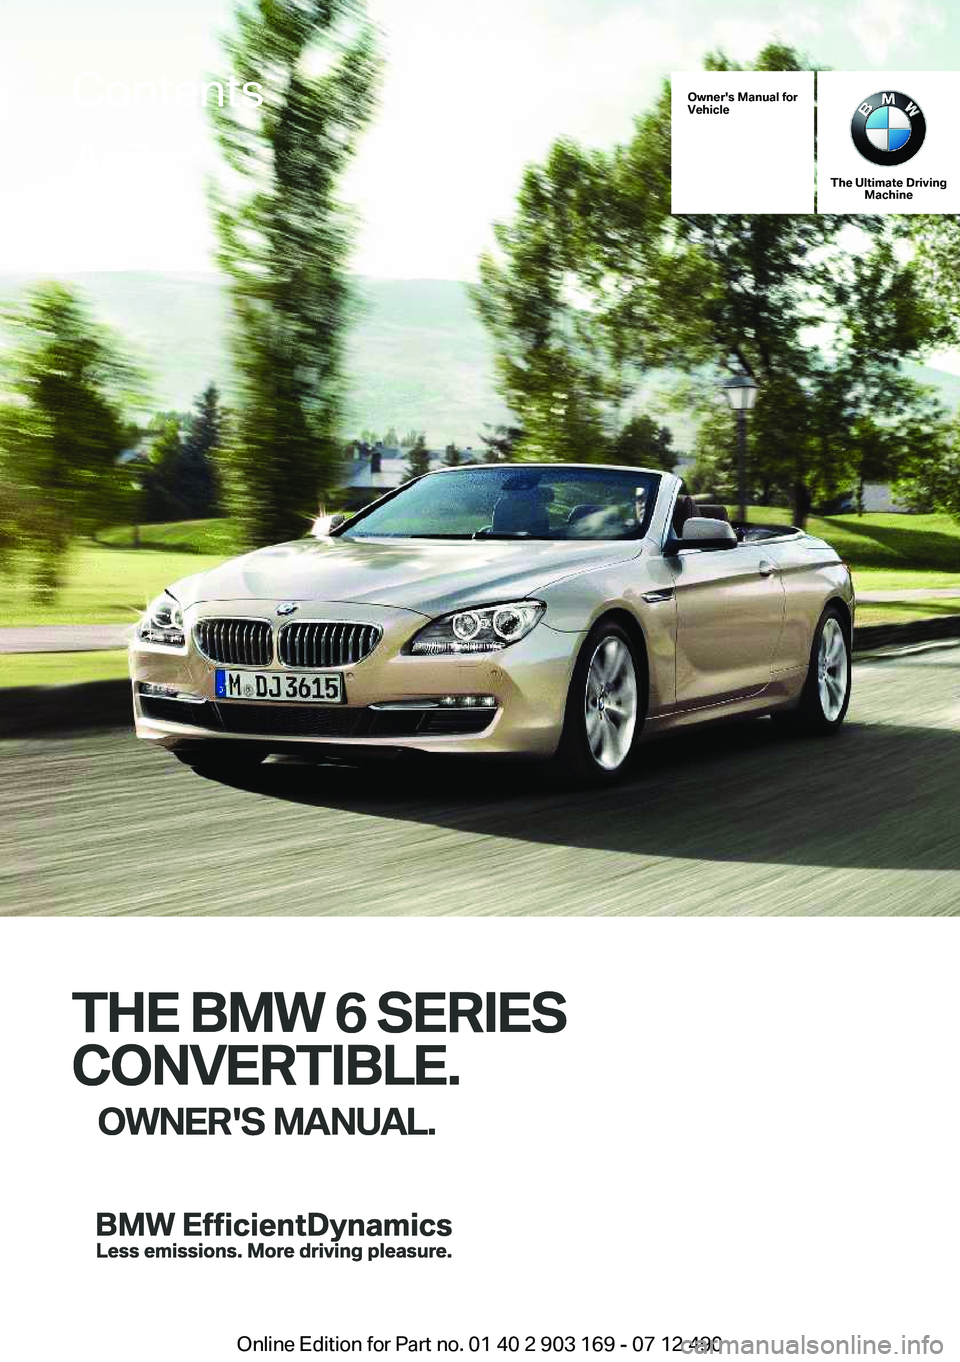 BMW 650I XDRIVE CONVERTIBLE 2013  Owners Manual Owner's Manual for
Vehicle
THE BMW 6 SERIES
CONVERTIBLE. OWNER'S MANUAL.
The Ultimate Driving Machine
THE BMW 6 SERIES
CONVERTIBLE. OWNER'S MANUAL.
ContentsA-Z
Online Edition for Part no. 